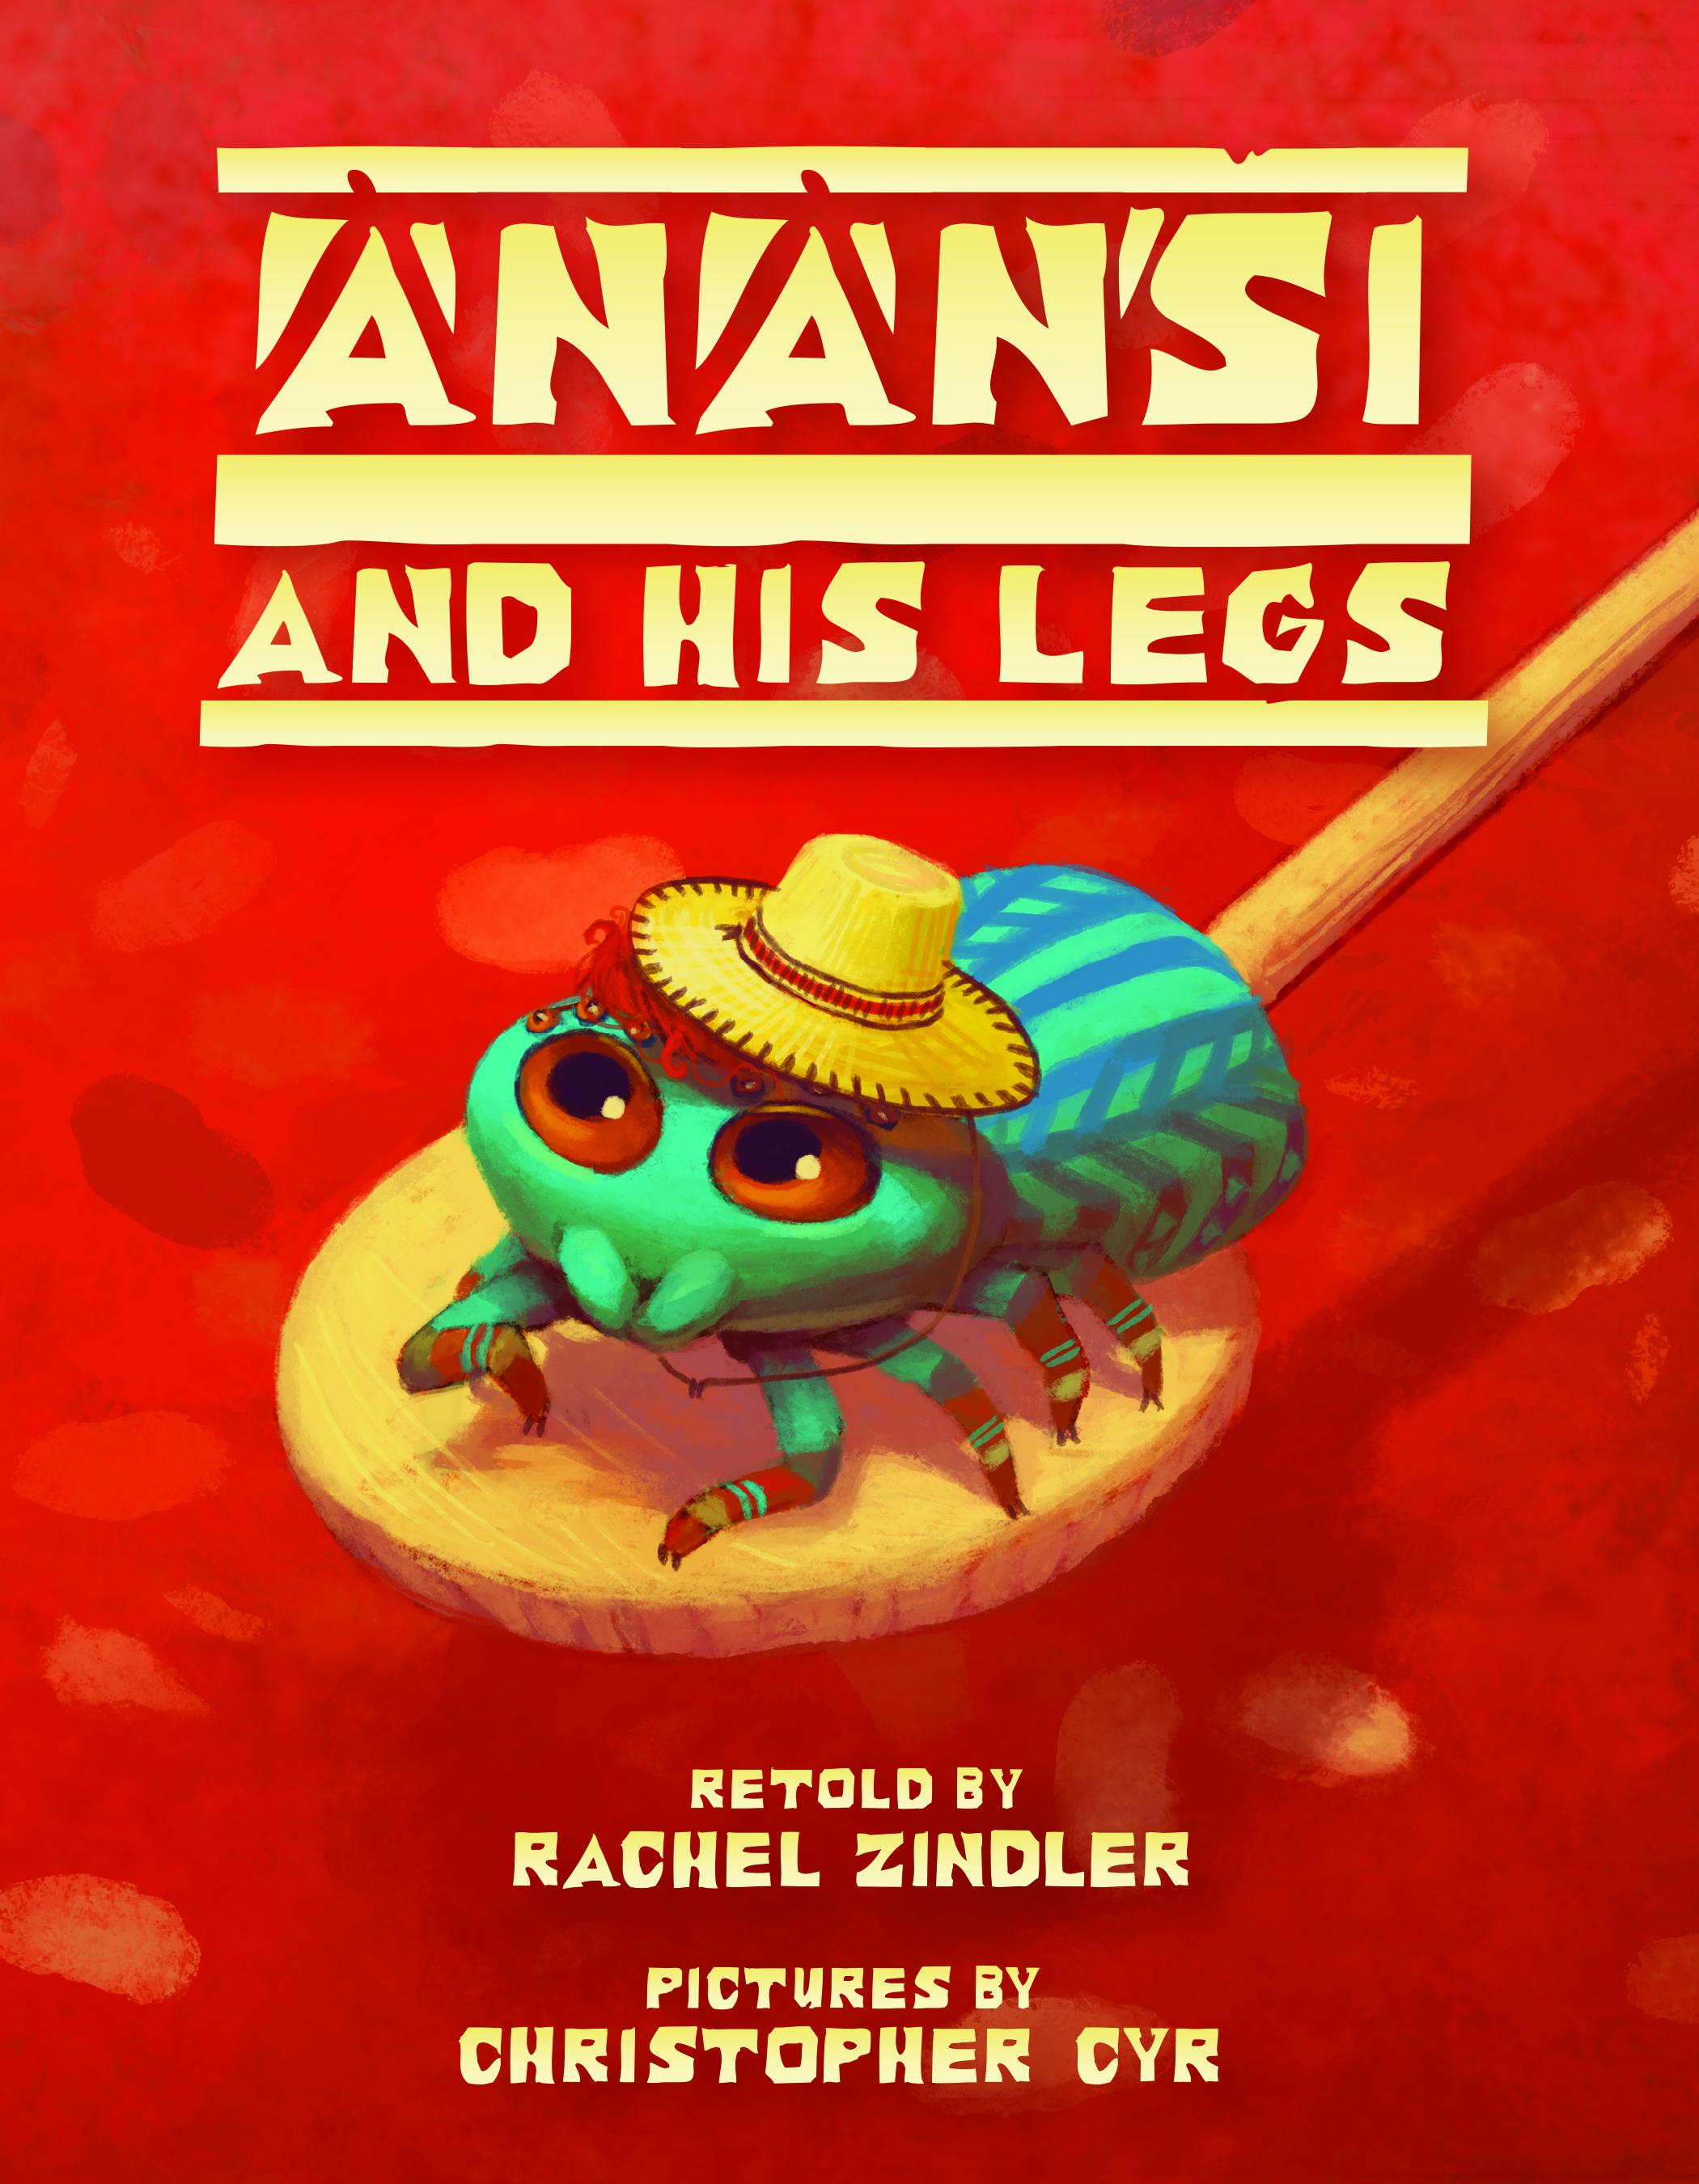 Anasi and His Legs book cover with green beetle wearing a hat on a spoon.